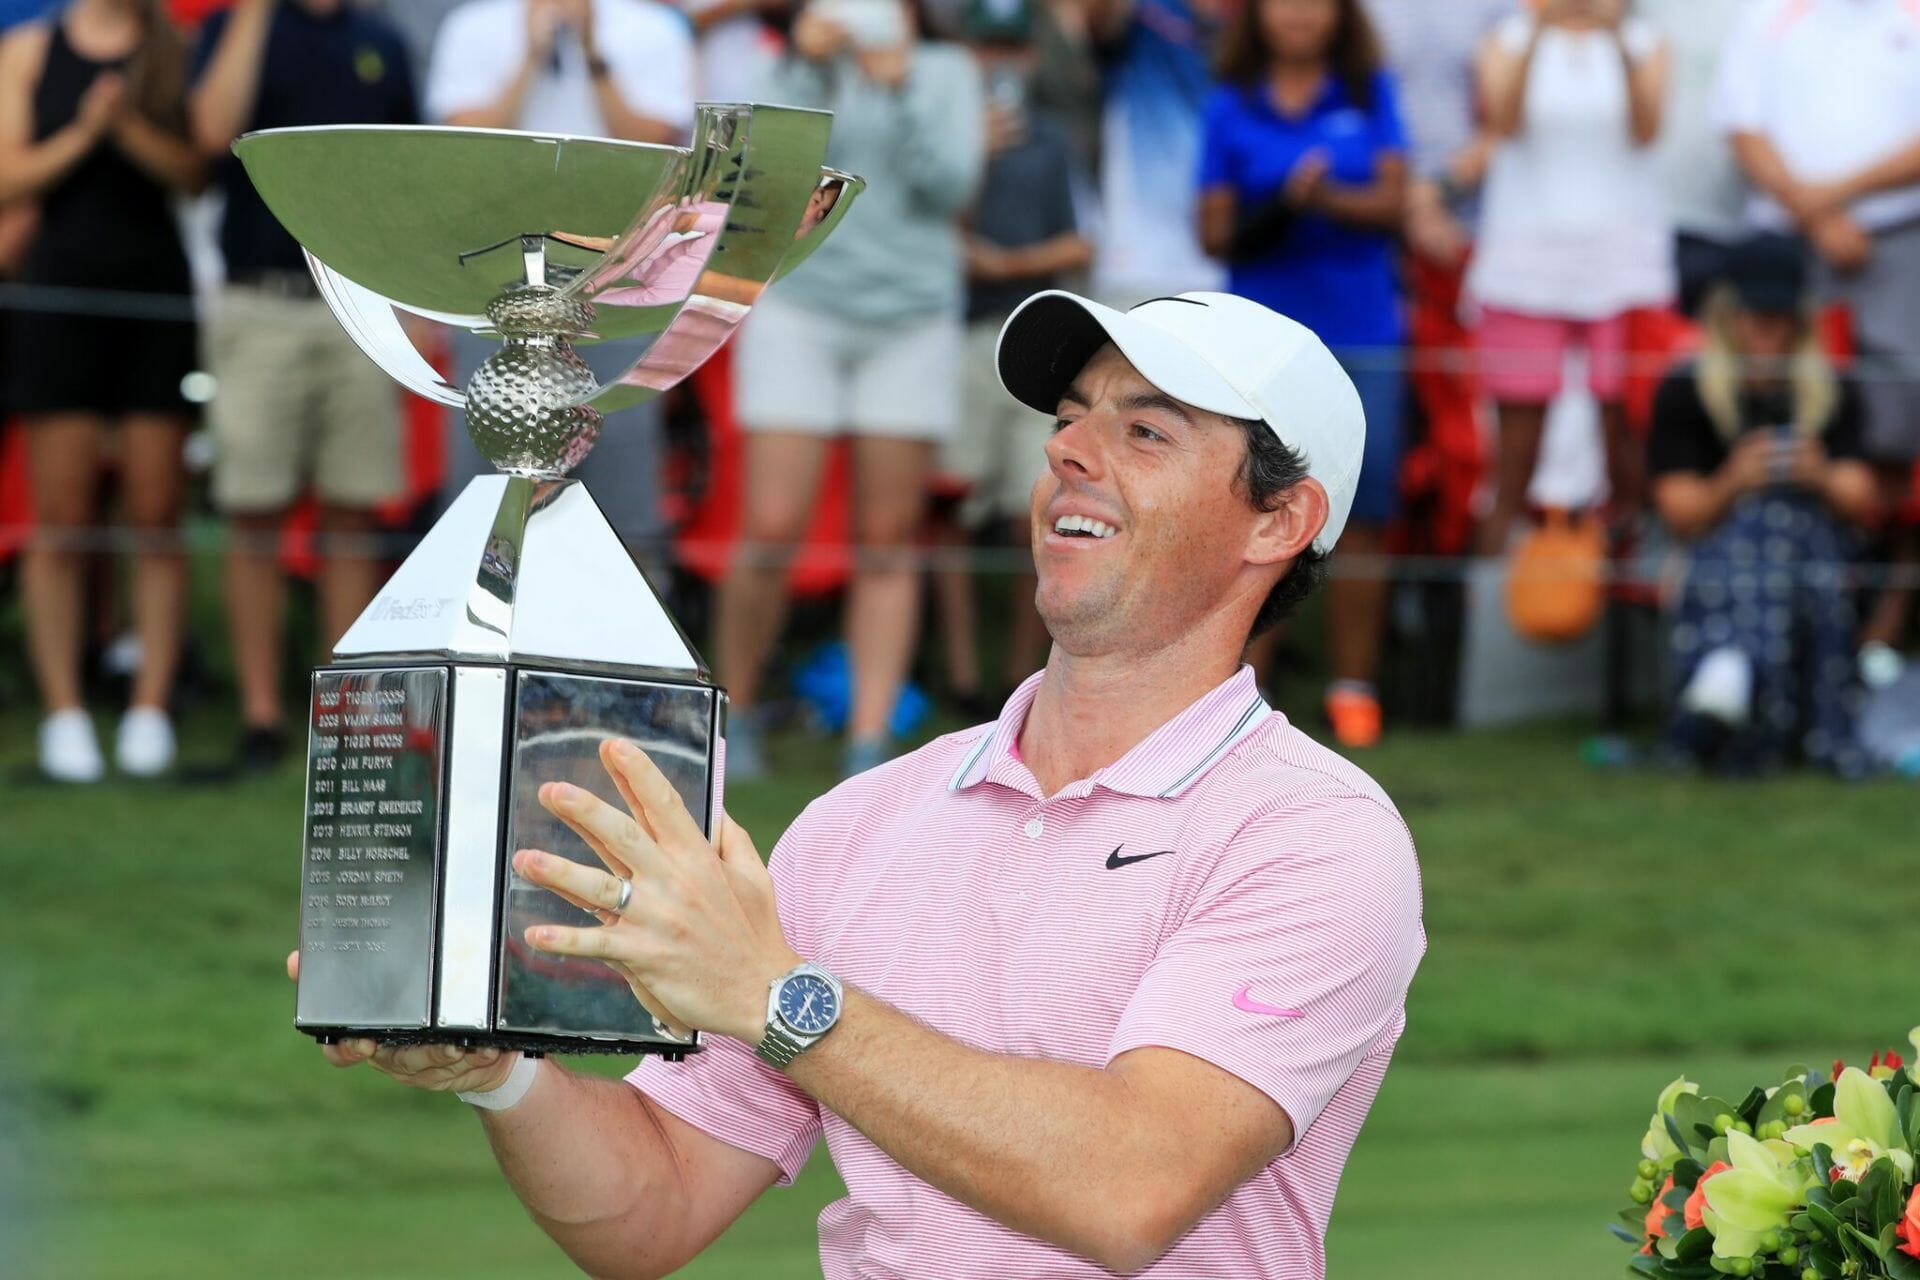 Fellow Major Champions single out McIlroy as their Player of the Decade